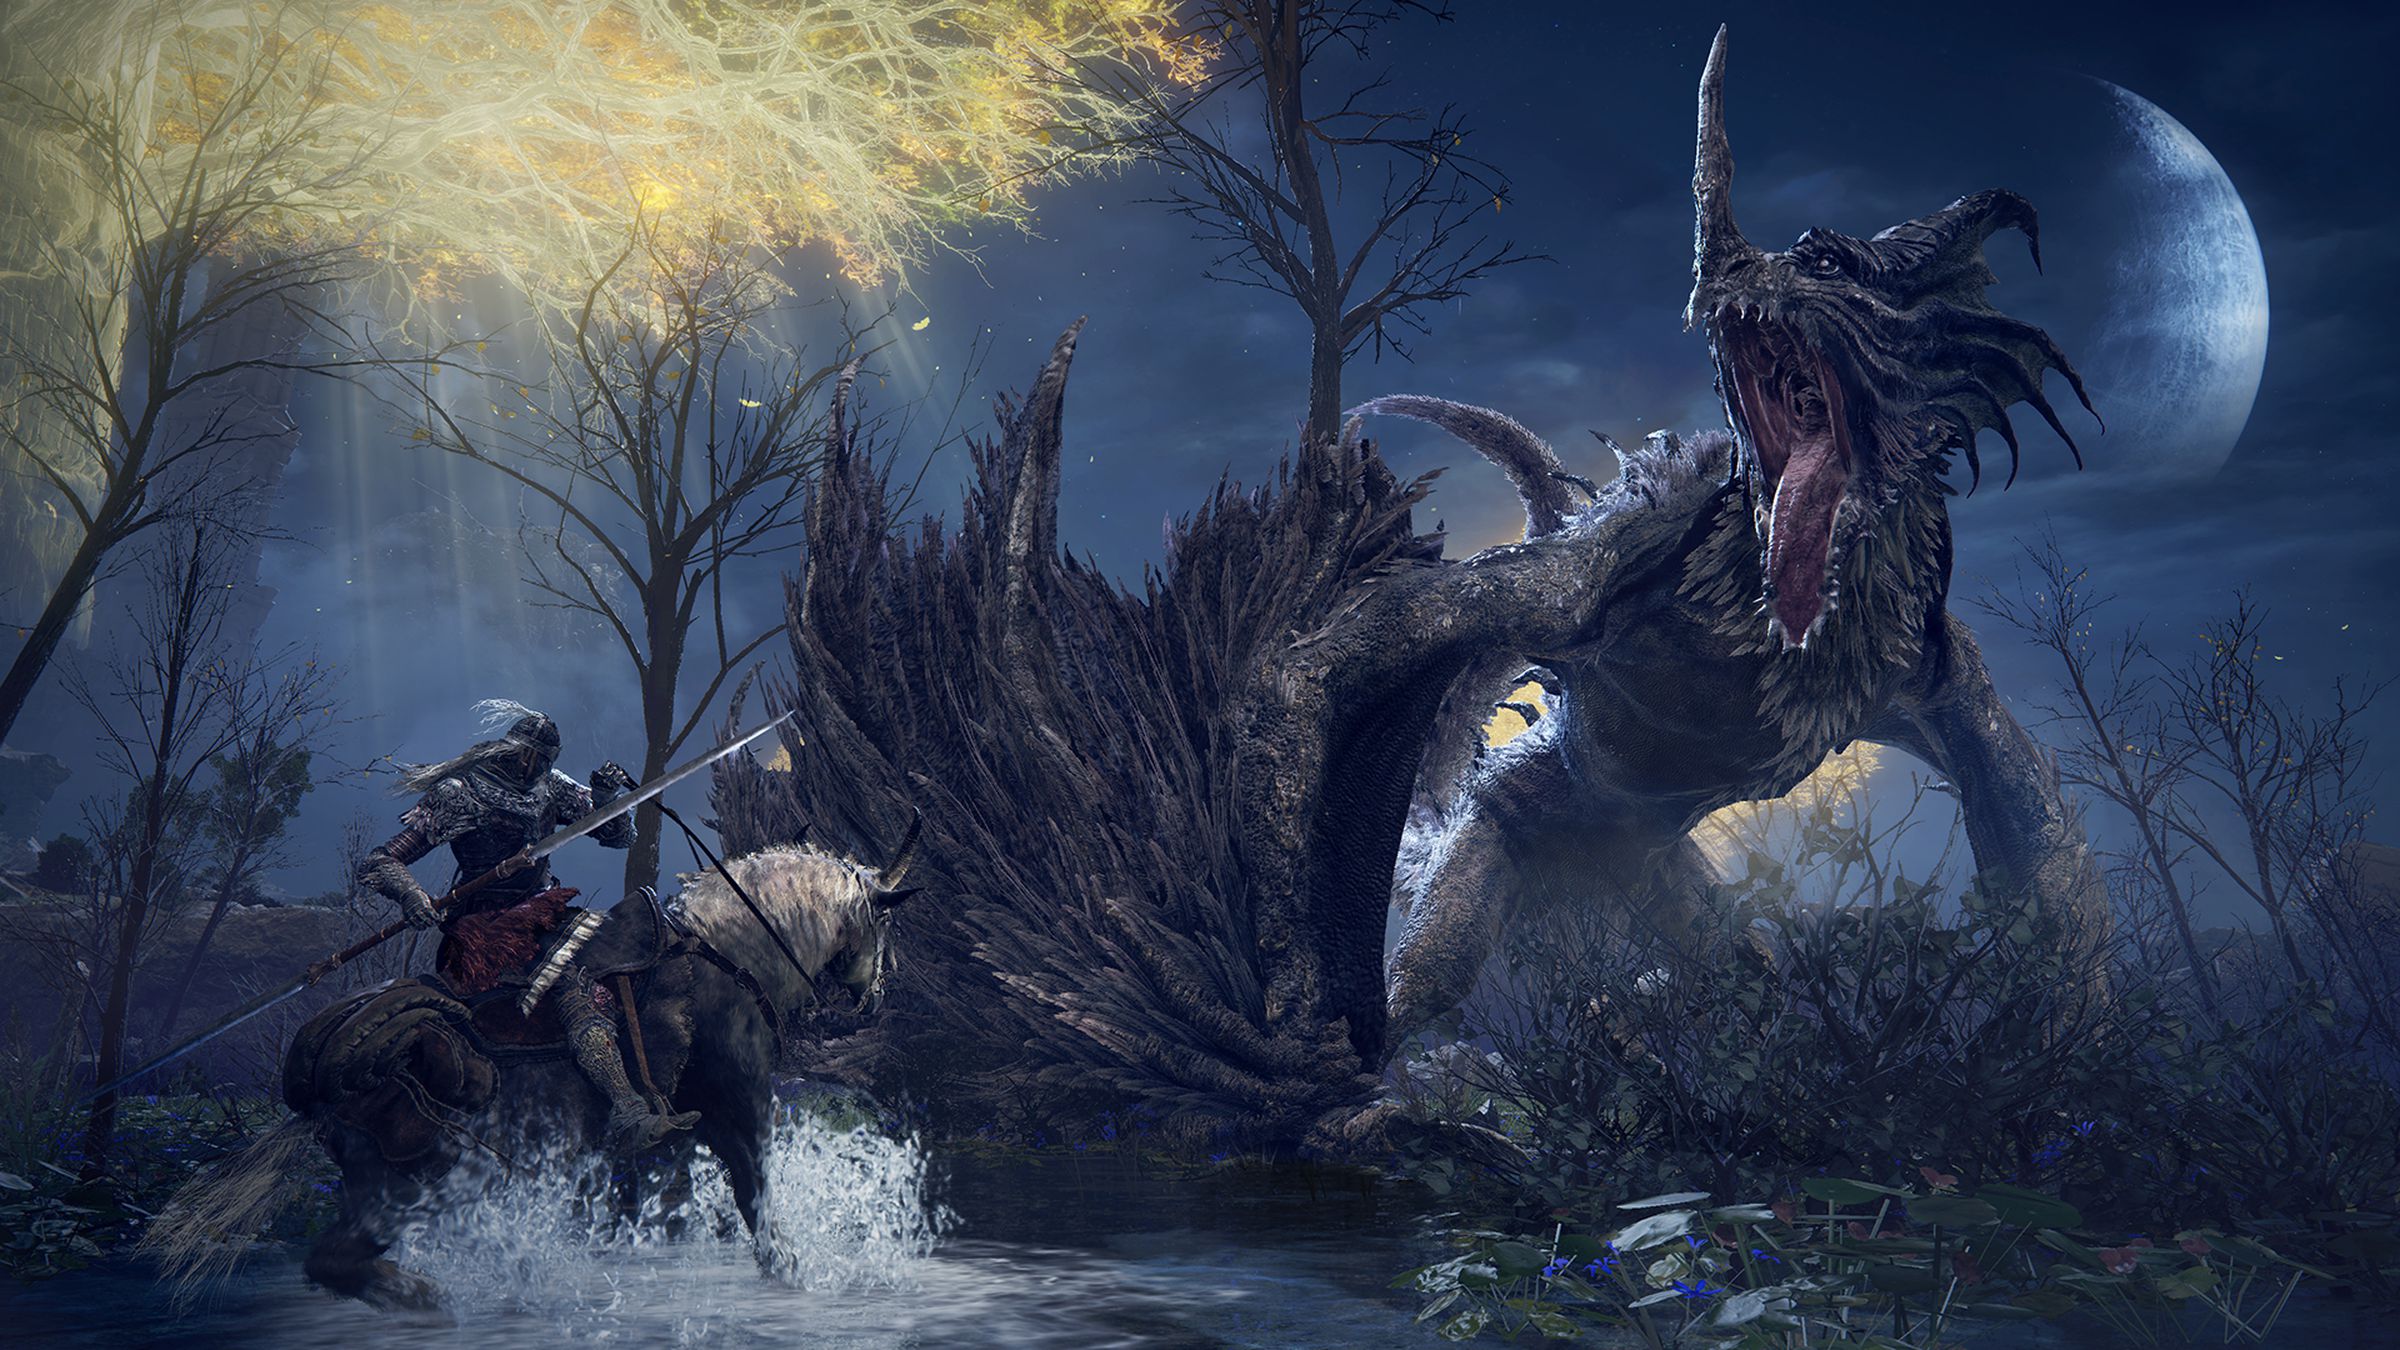 Screenshot of a character fighting a beast from the game Elden Ring.